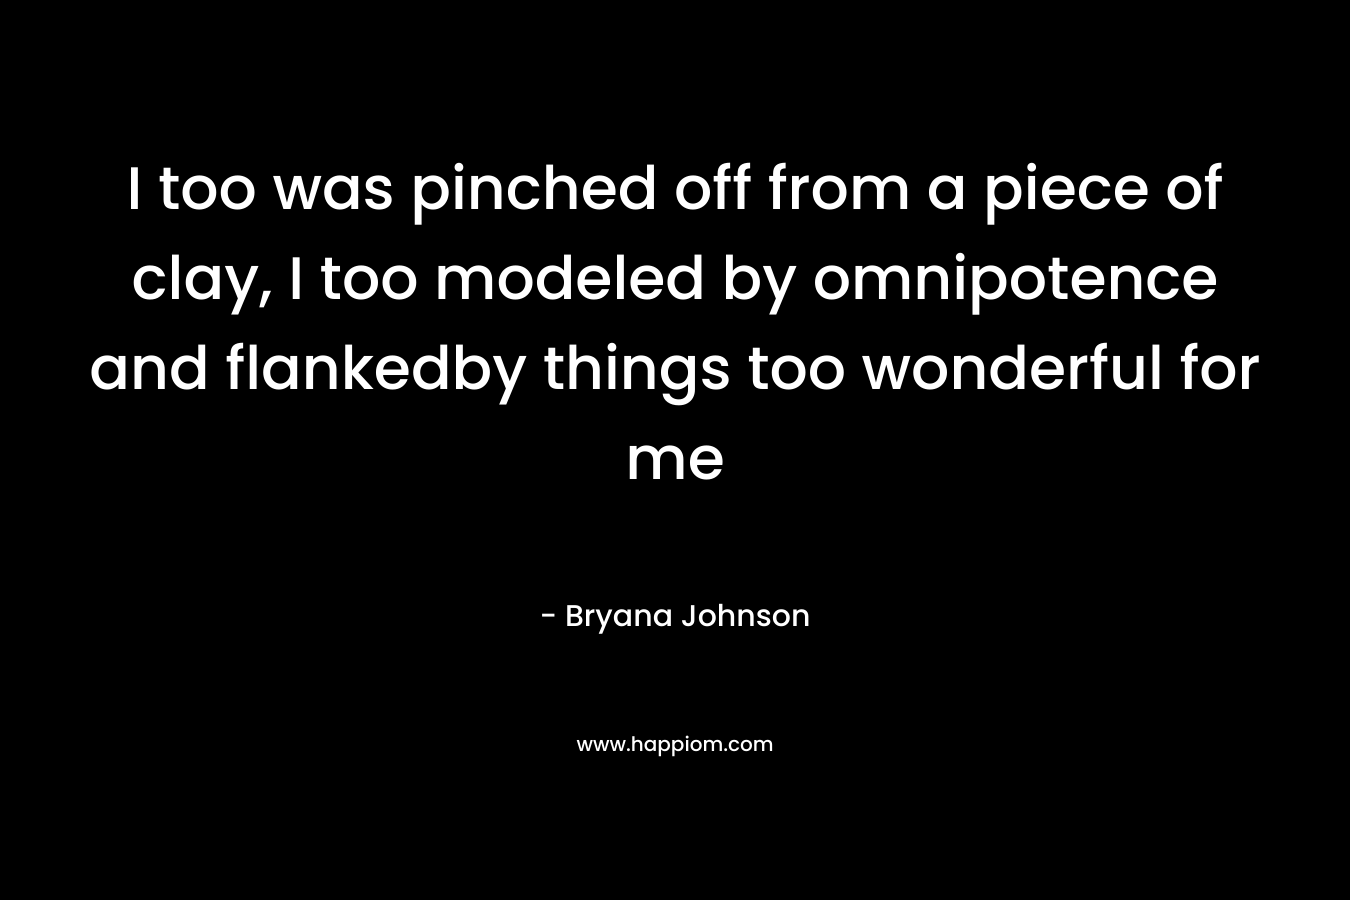 I too was pinched off from a piece of clay, I too modeled by omnipotence and flankedby things too wonderful for me